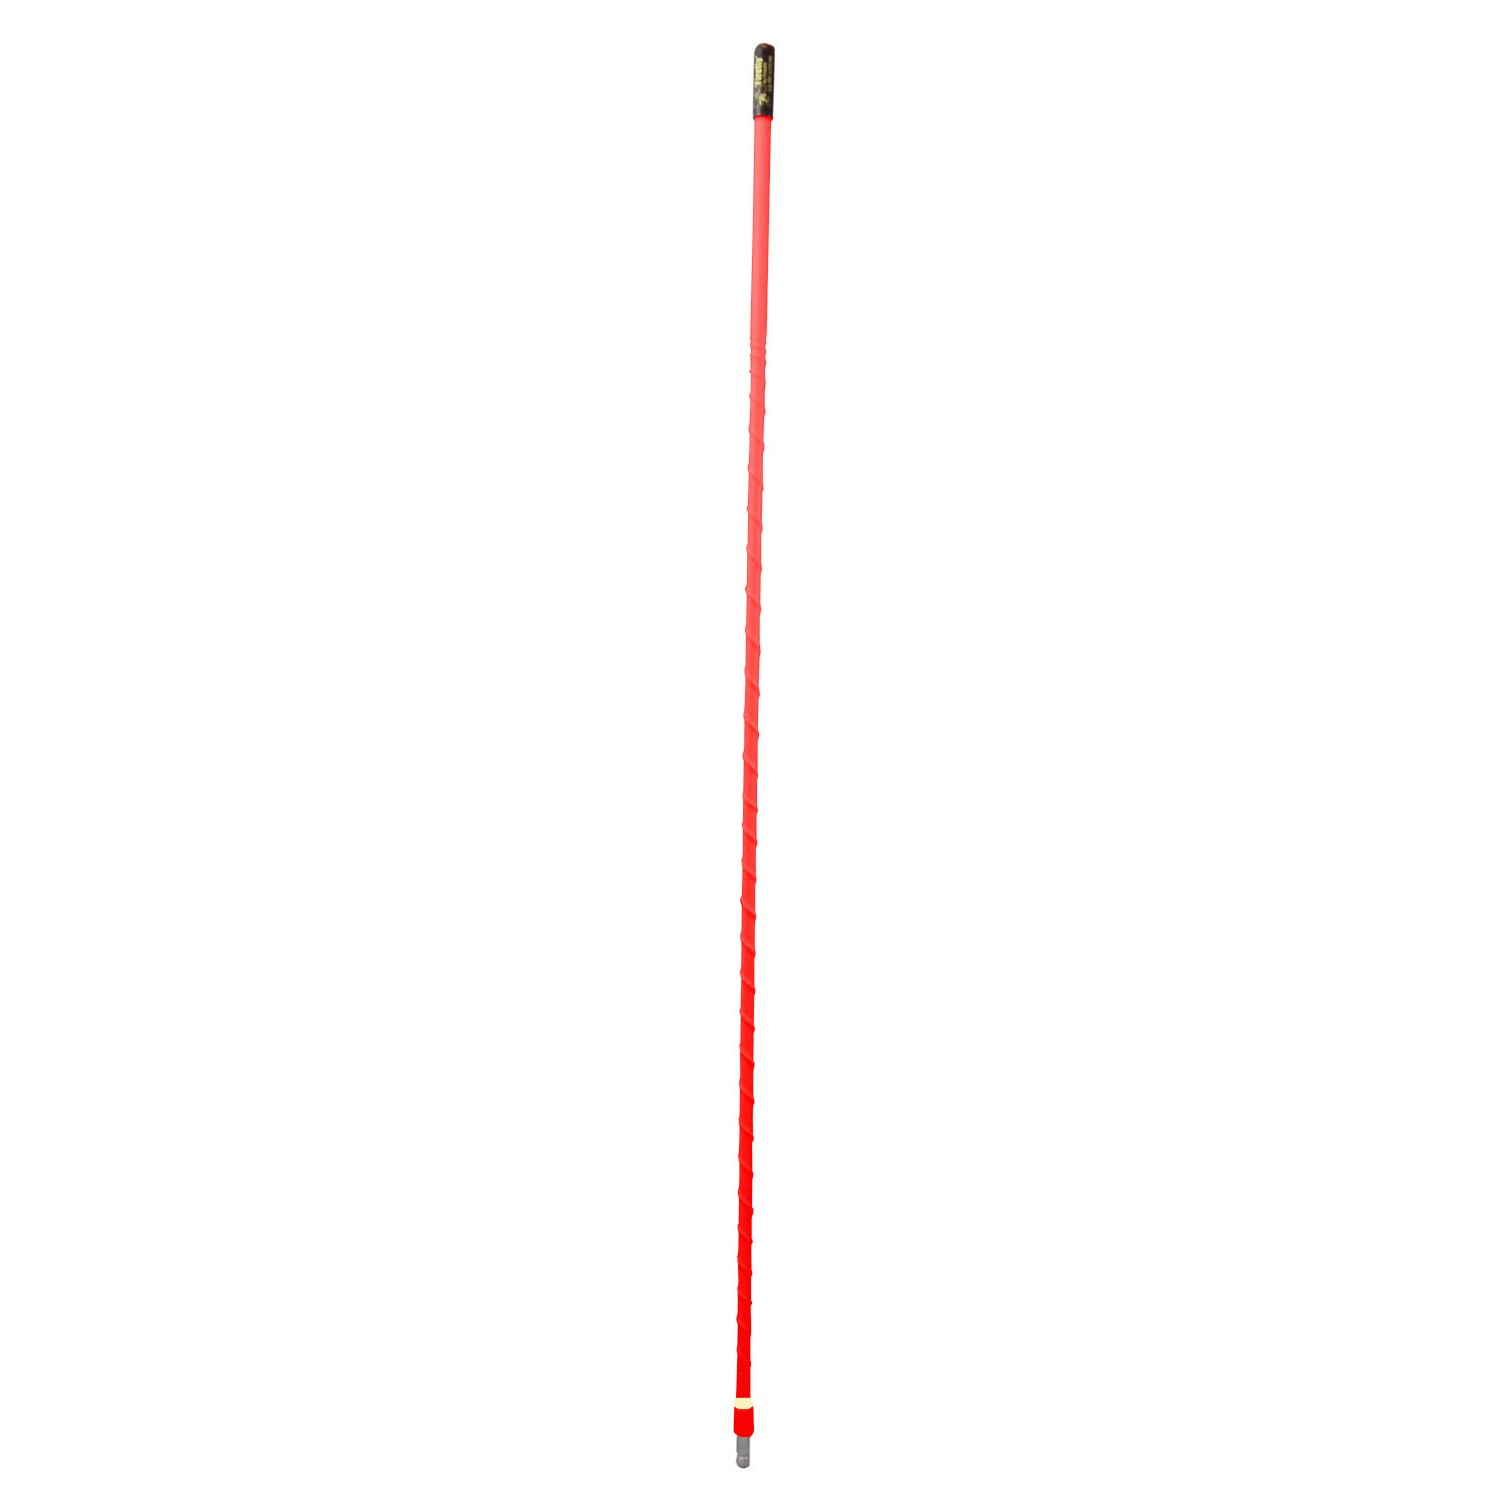 FIRESTIK - LG3-R NO GROUND PLANE 3 FOOT CB ANTENNA WITH 3/8"-24 THREADED BASE - RED